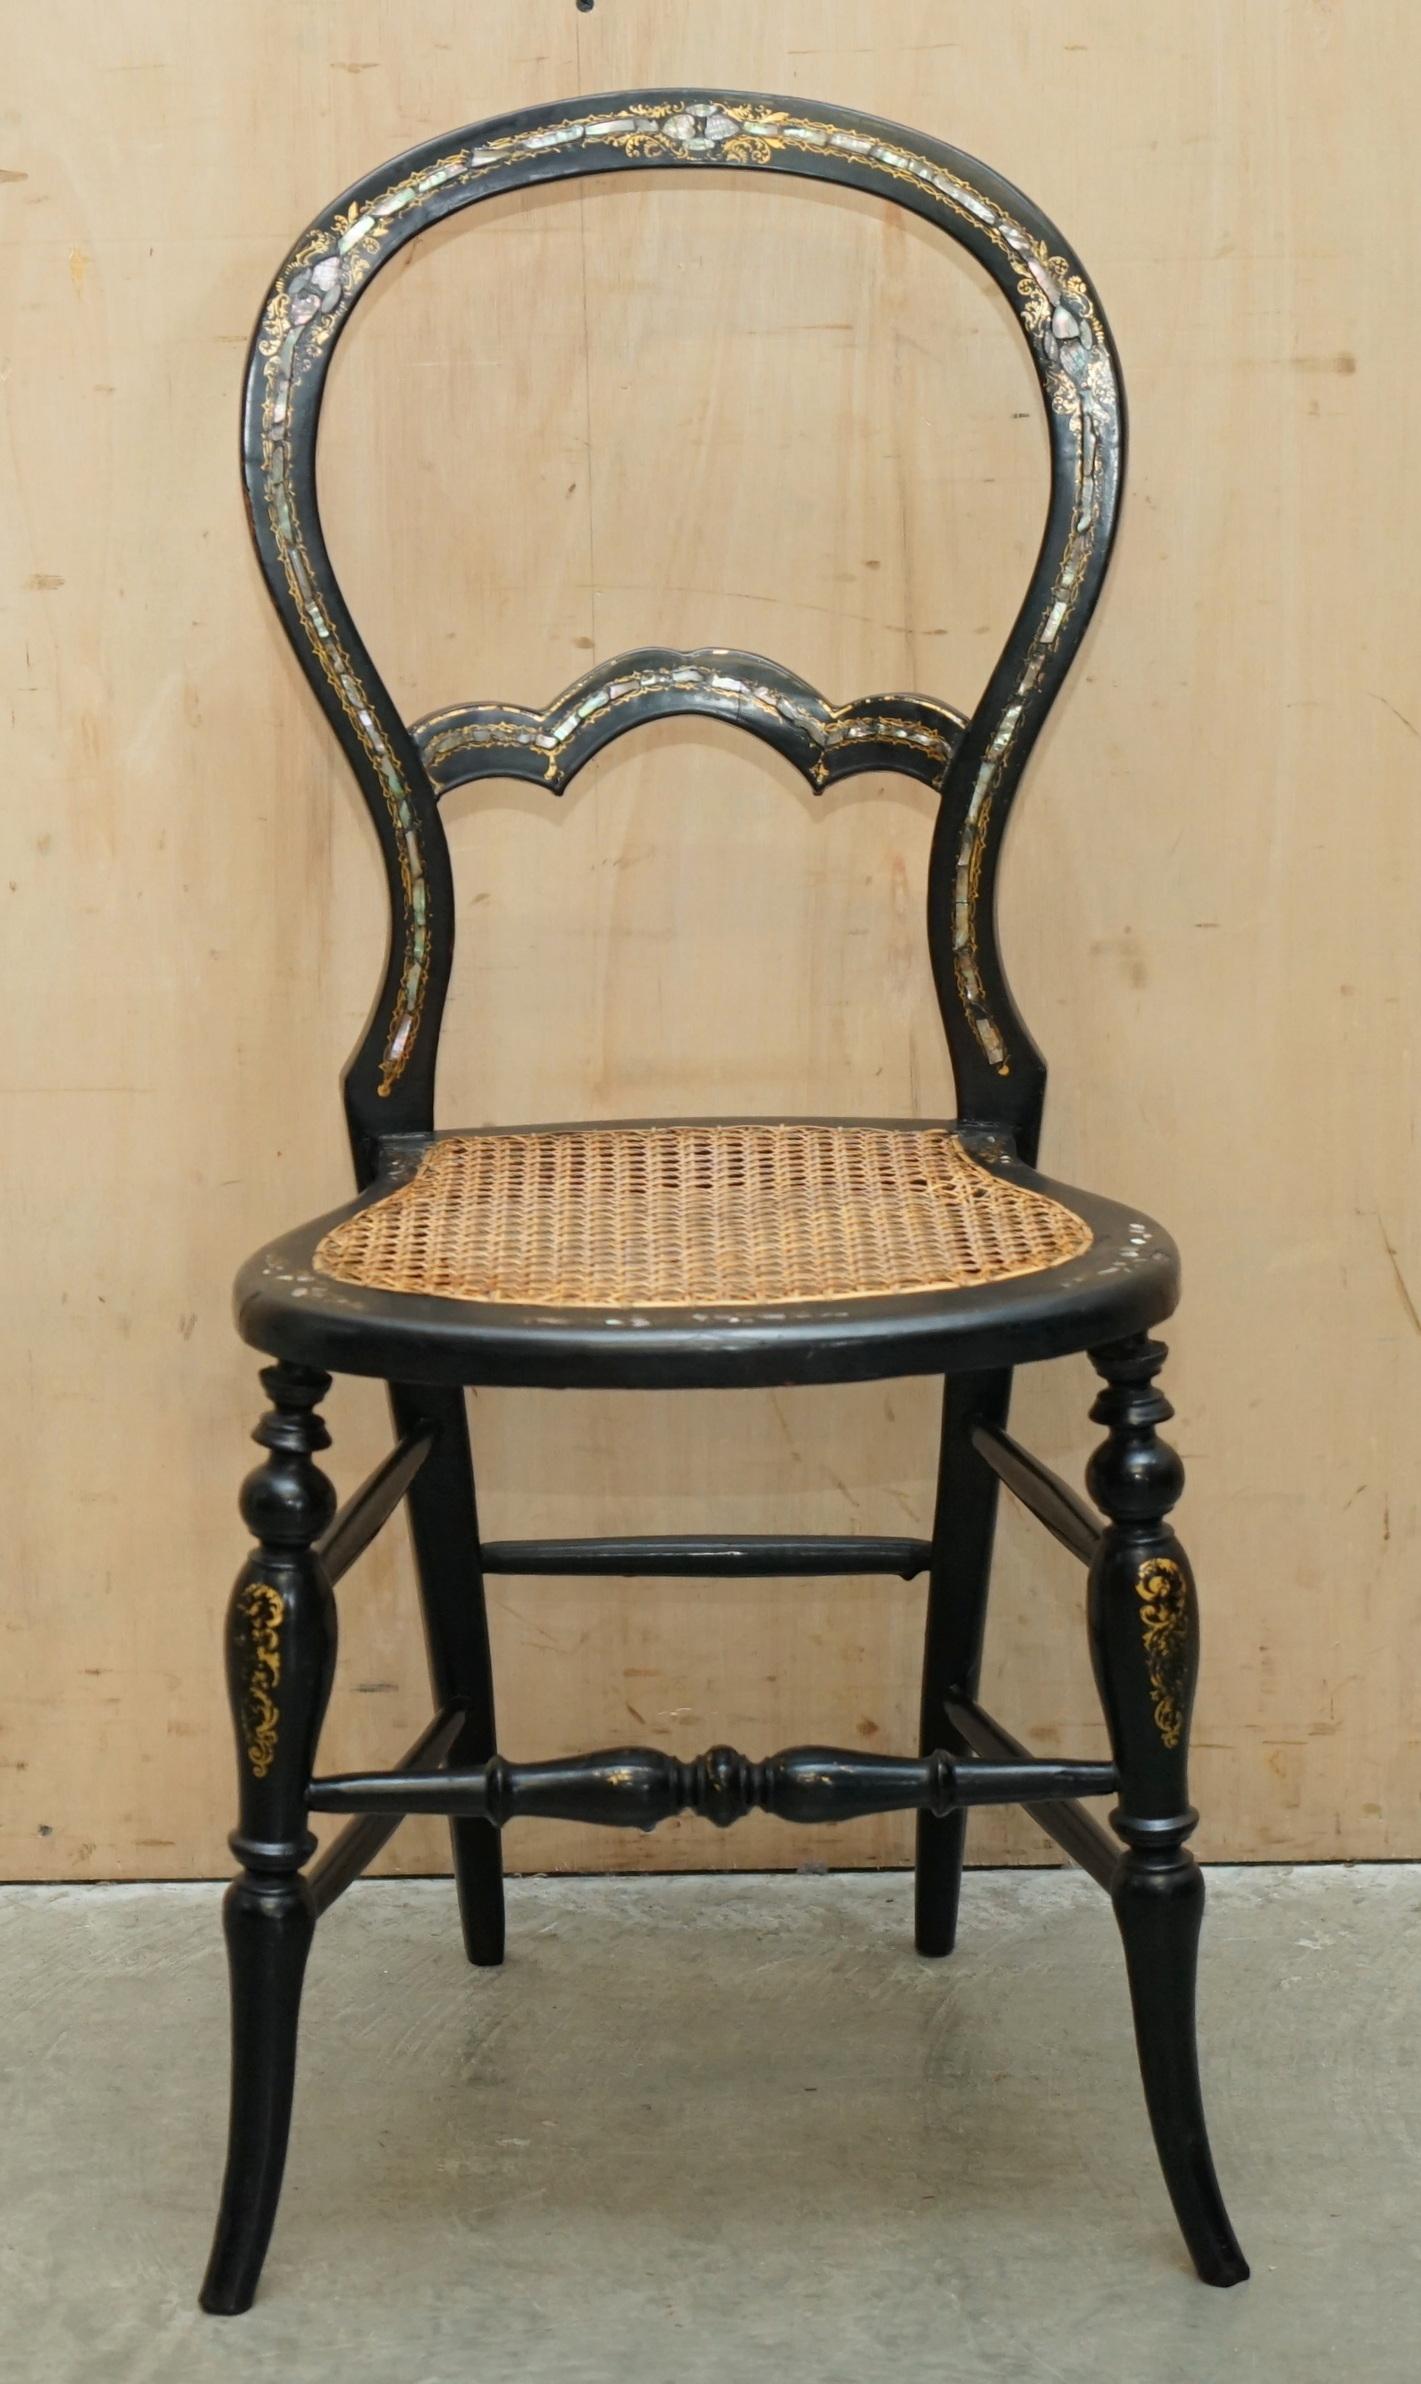 VIER FINE UND ANTIQUE REGENCY BERGERE MOTHER OF PEARL EBONISED SIDE CHAIRs im Angebot 10